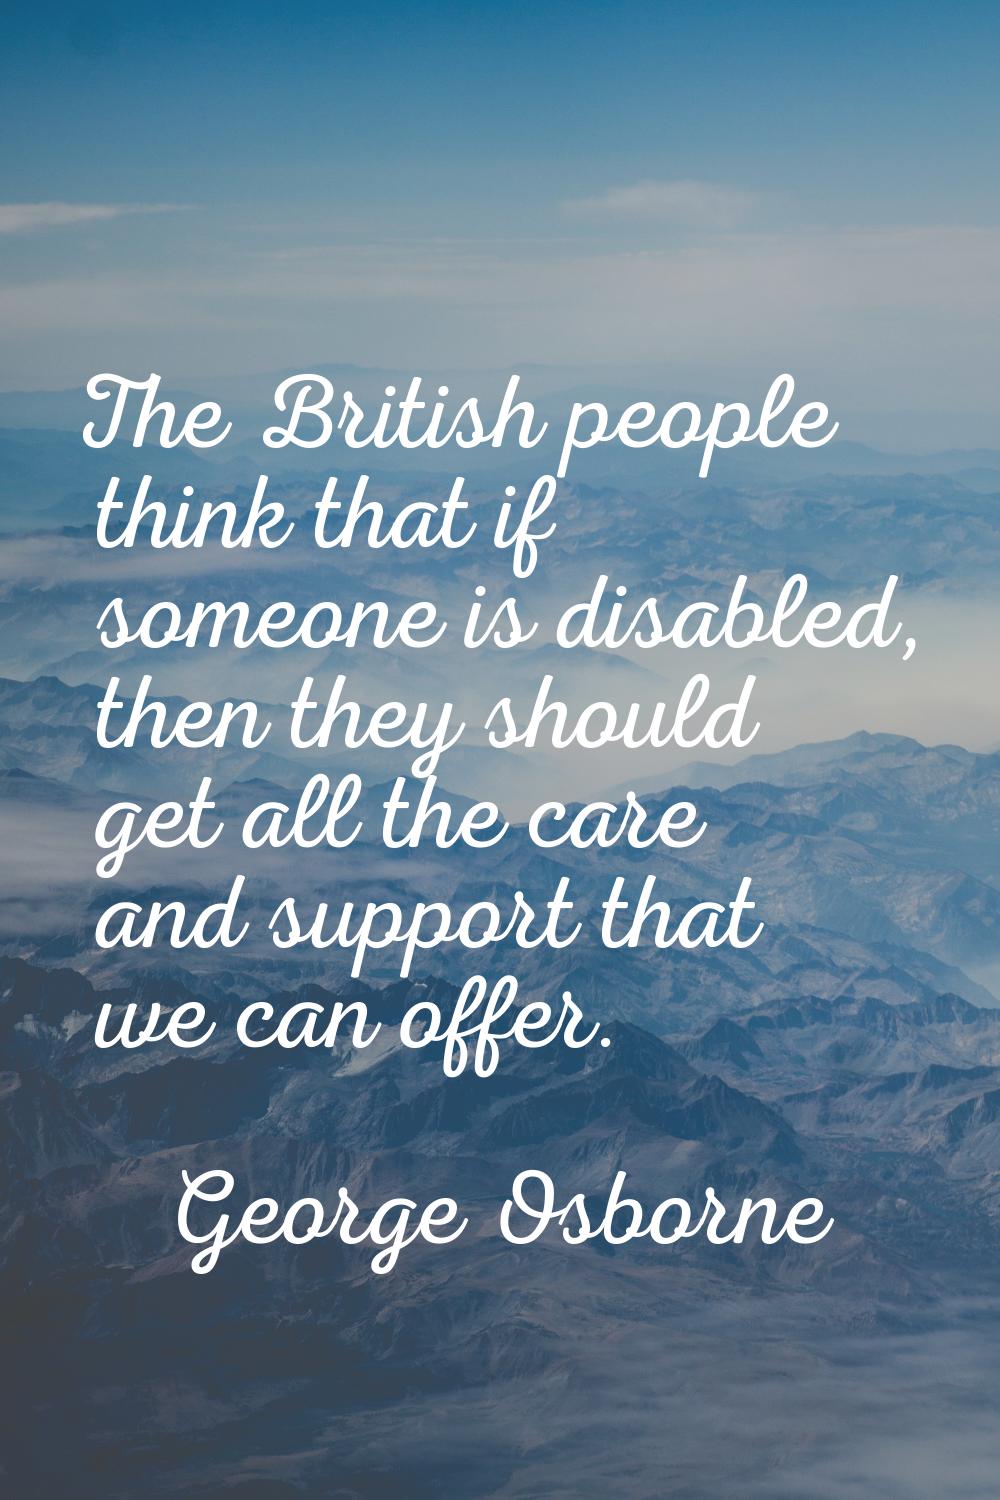 The British people think that if someone is disabled, then they should get all the care and support